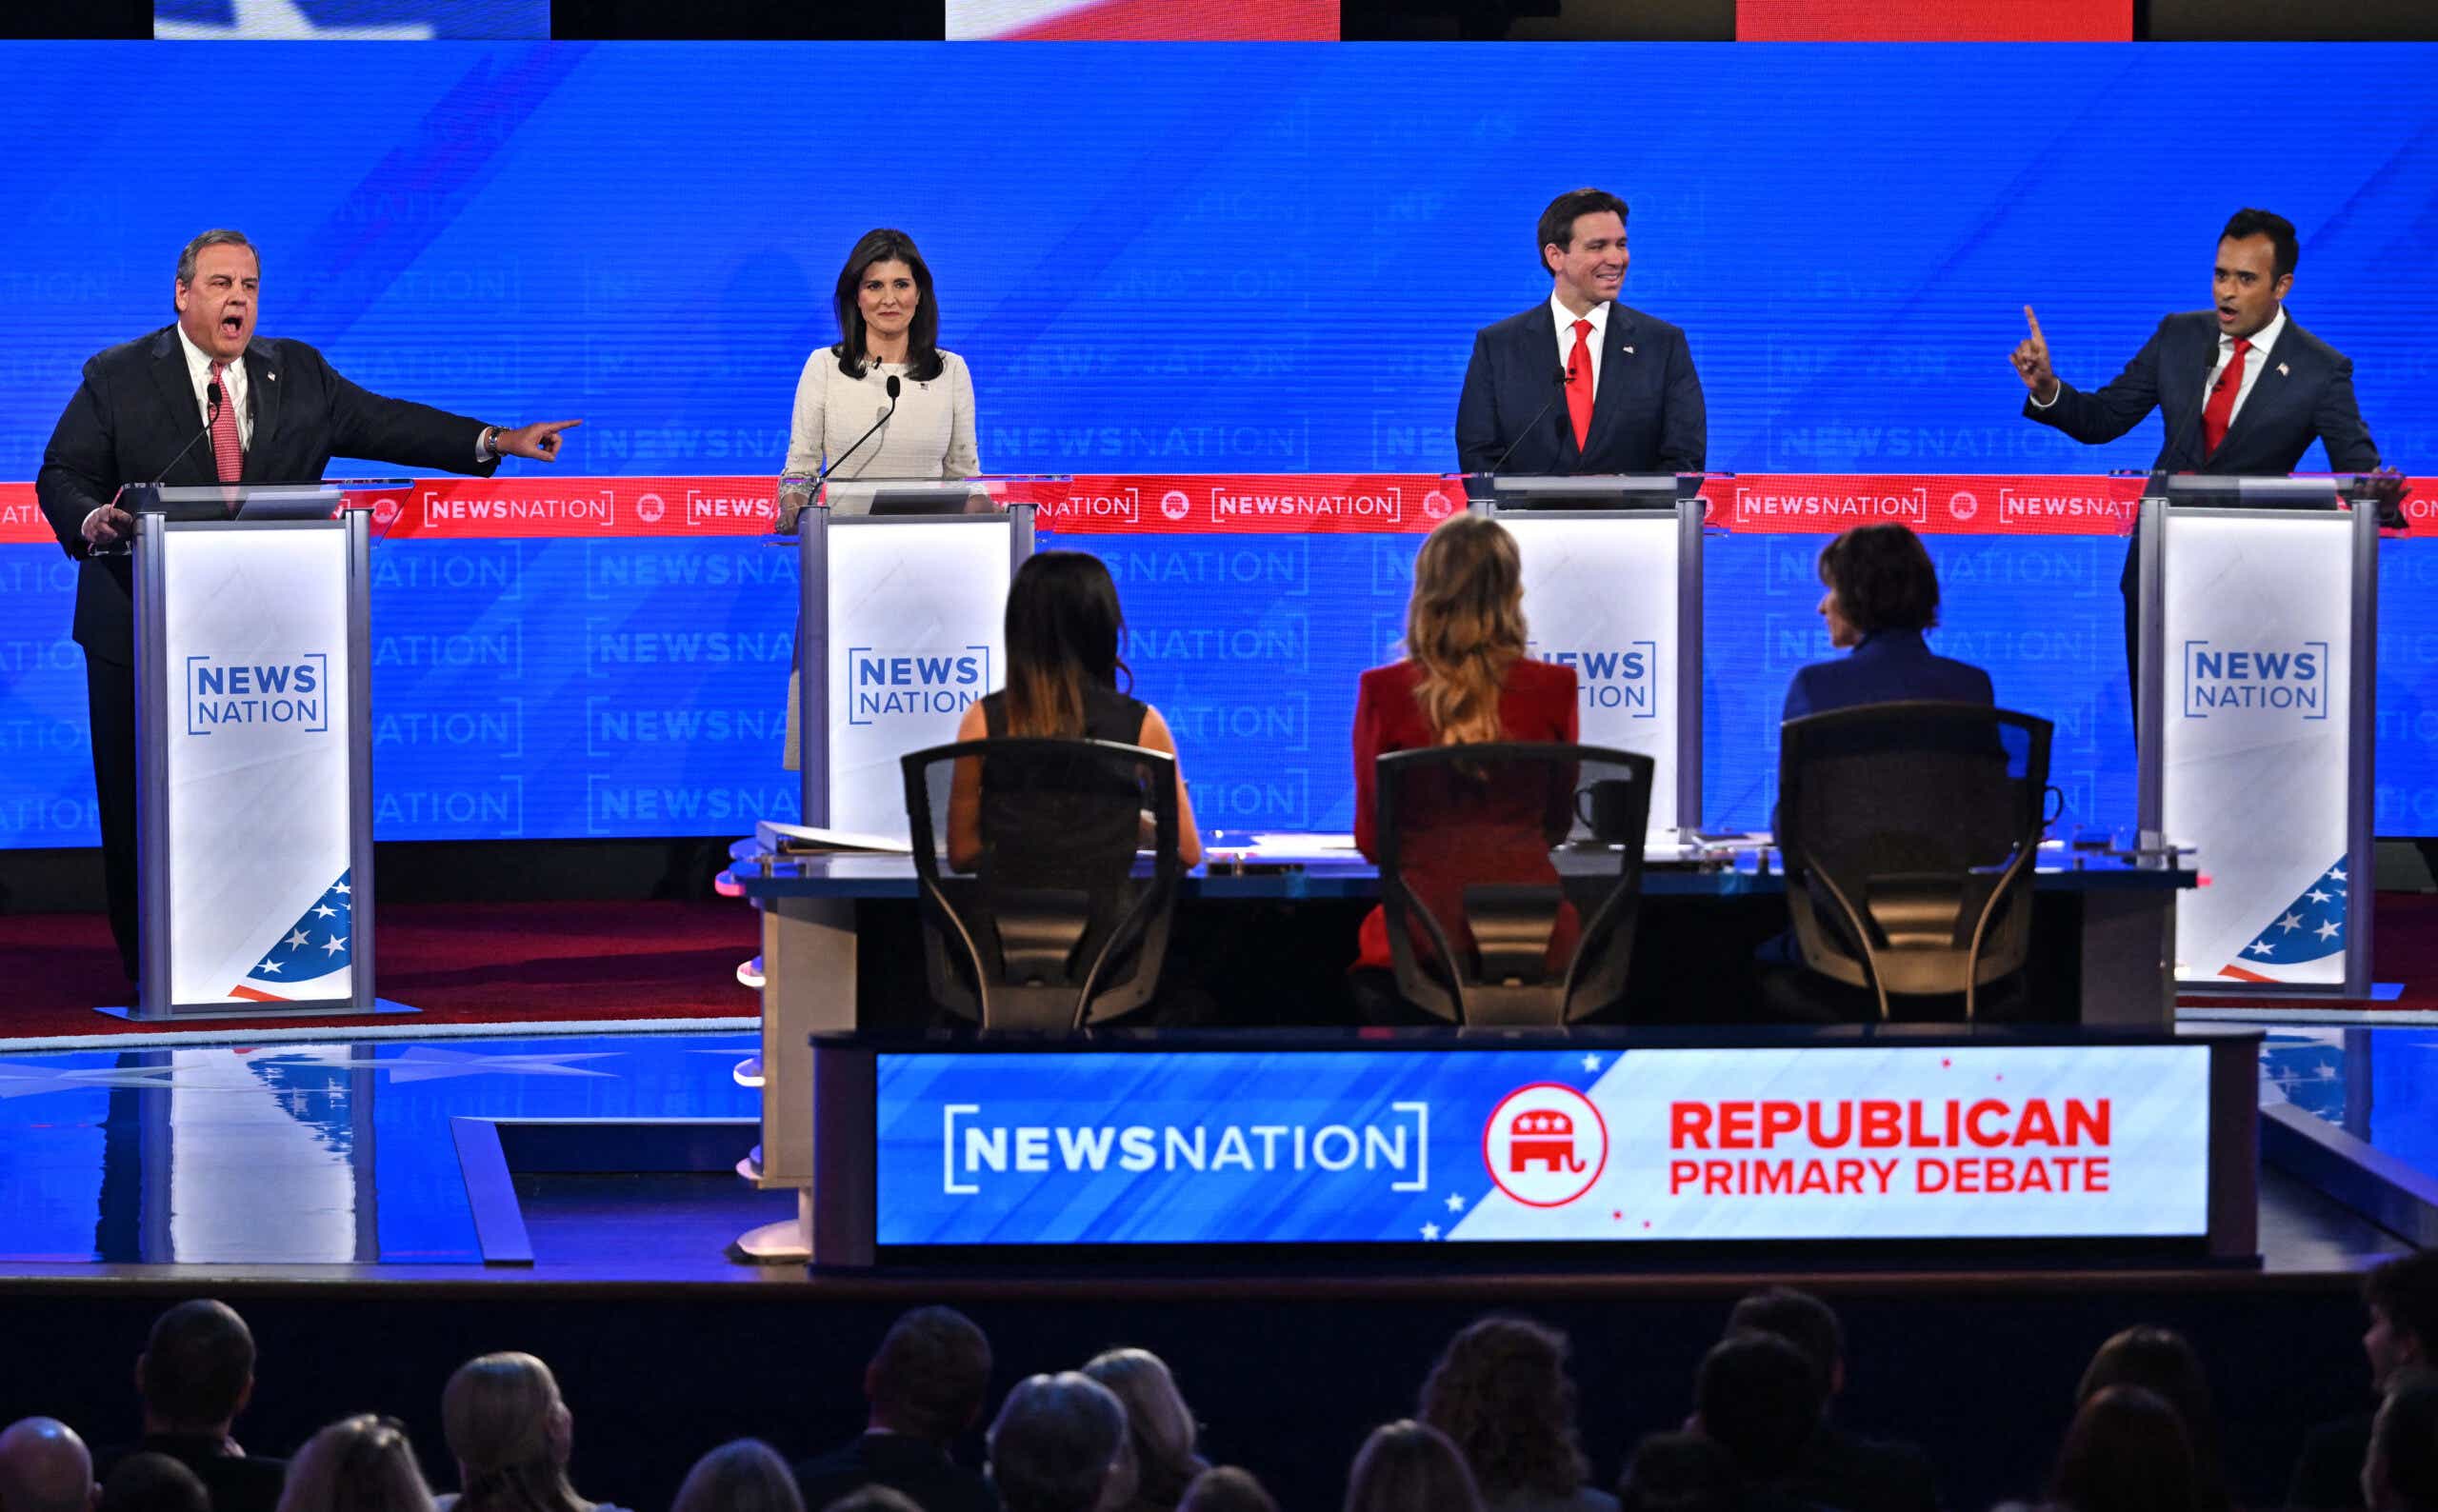 (From L) Former Governor of New Jersey Chris Christie, former Governor from South Carolina and UN ambassador Nikki Haley, Florida Governor Ron DeSantis and entrepreneur Vivek Ramaswamy participate in the fourth Republican presidential primary debate at the University of Alabama